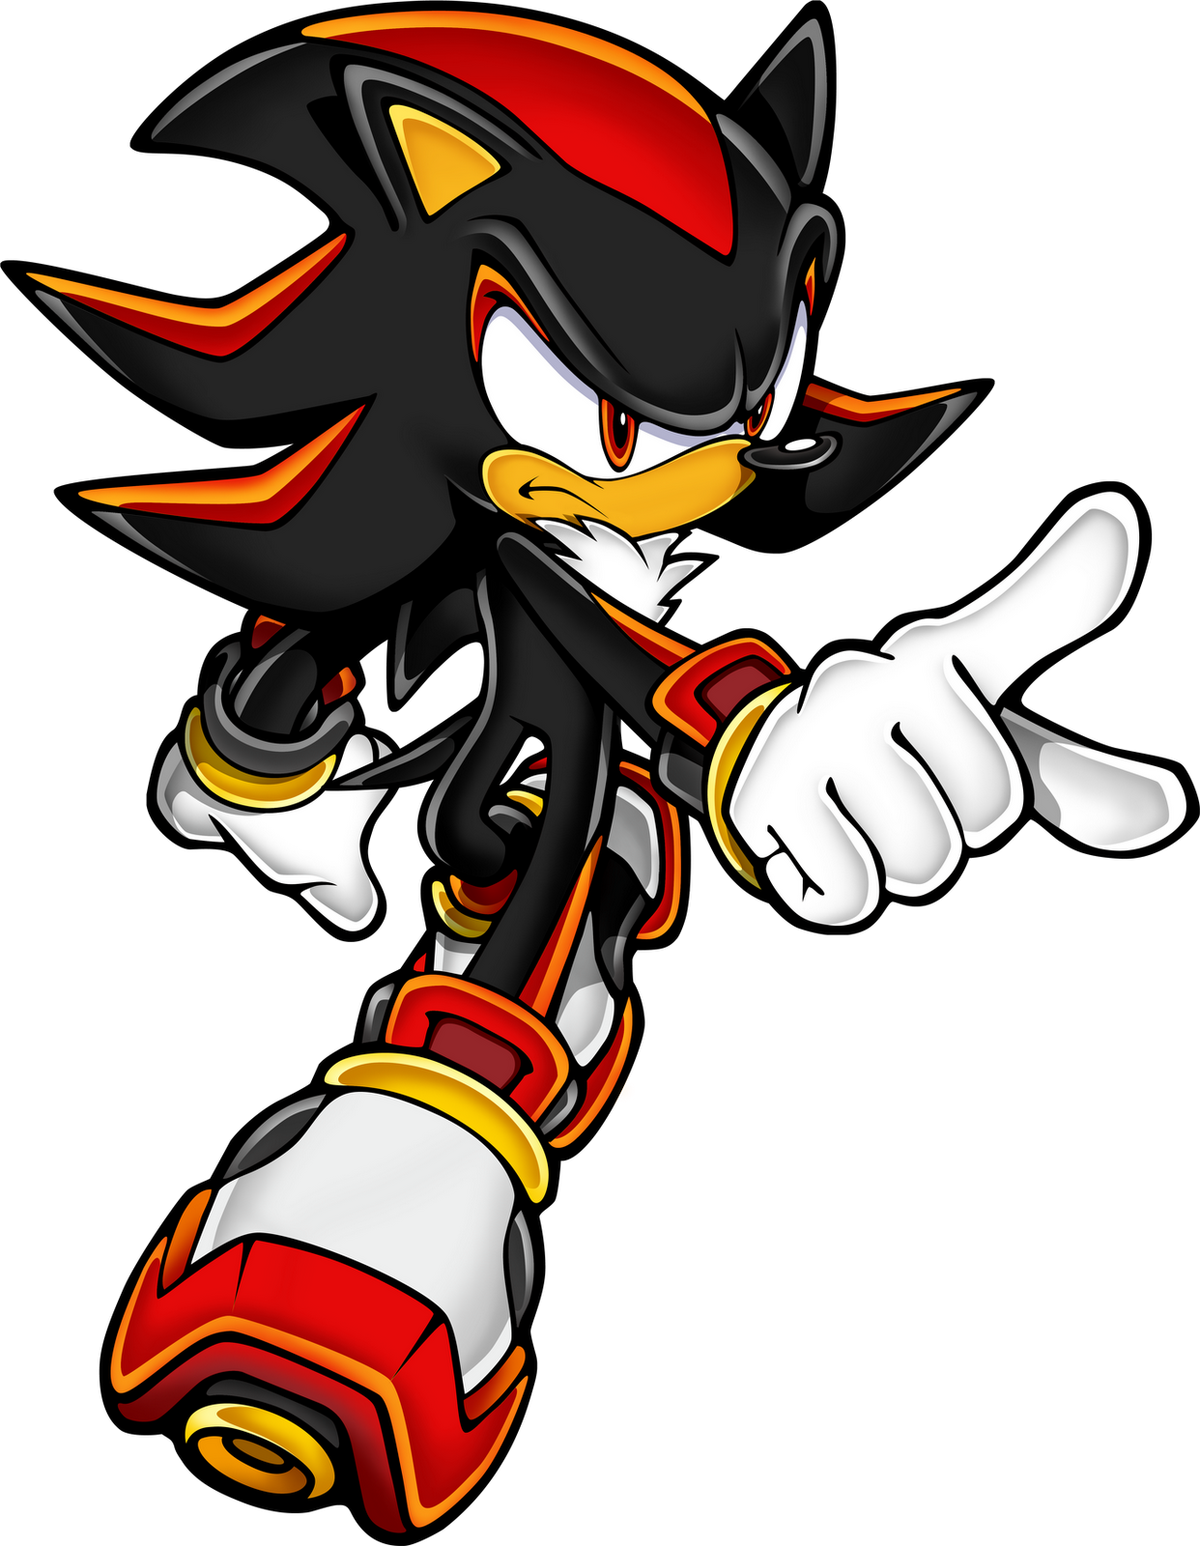 Shadow the Hedgehog Sonic Chronicles: The Dark Brotherhood Super Shadow  Sonic the Hedgehog Amy Rose, others, sonic The Hedgehog, video Game, super Shadow  png